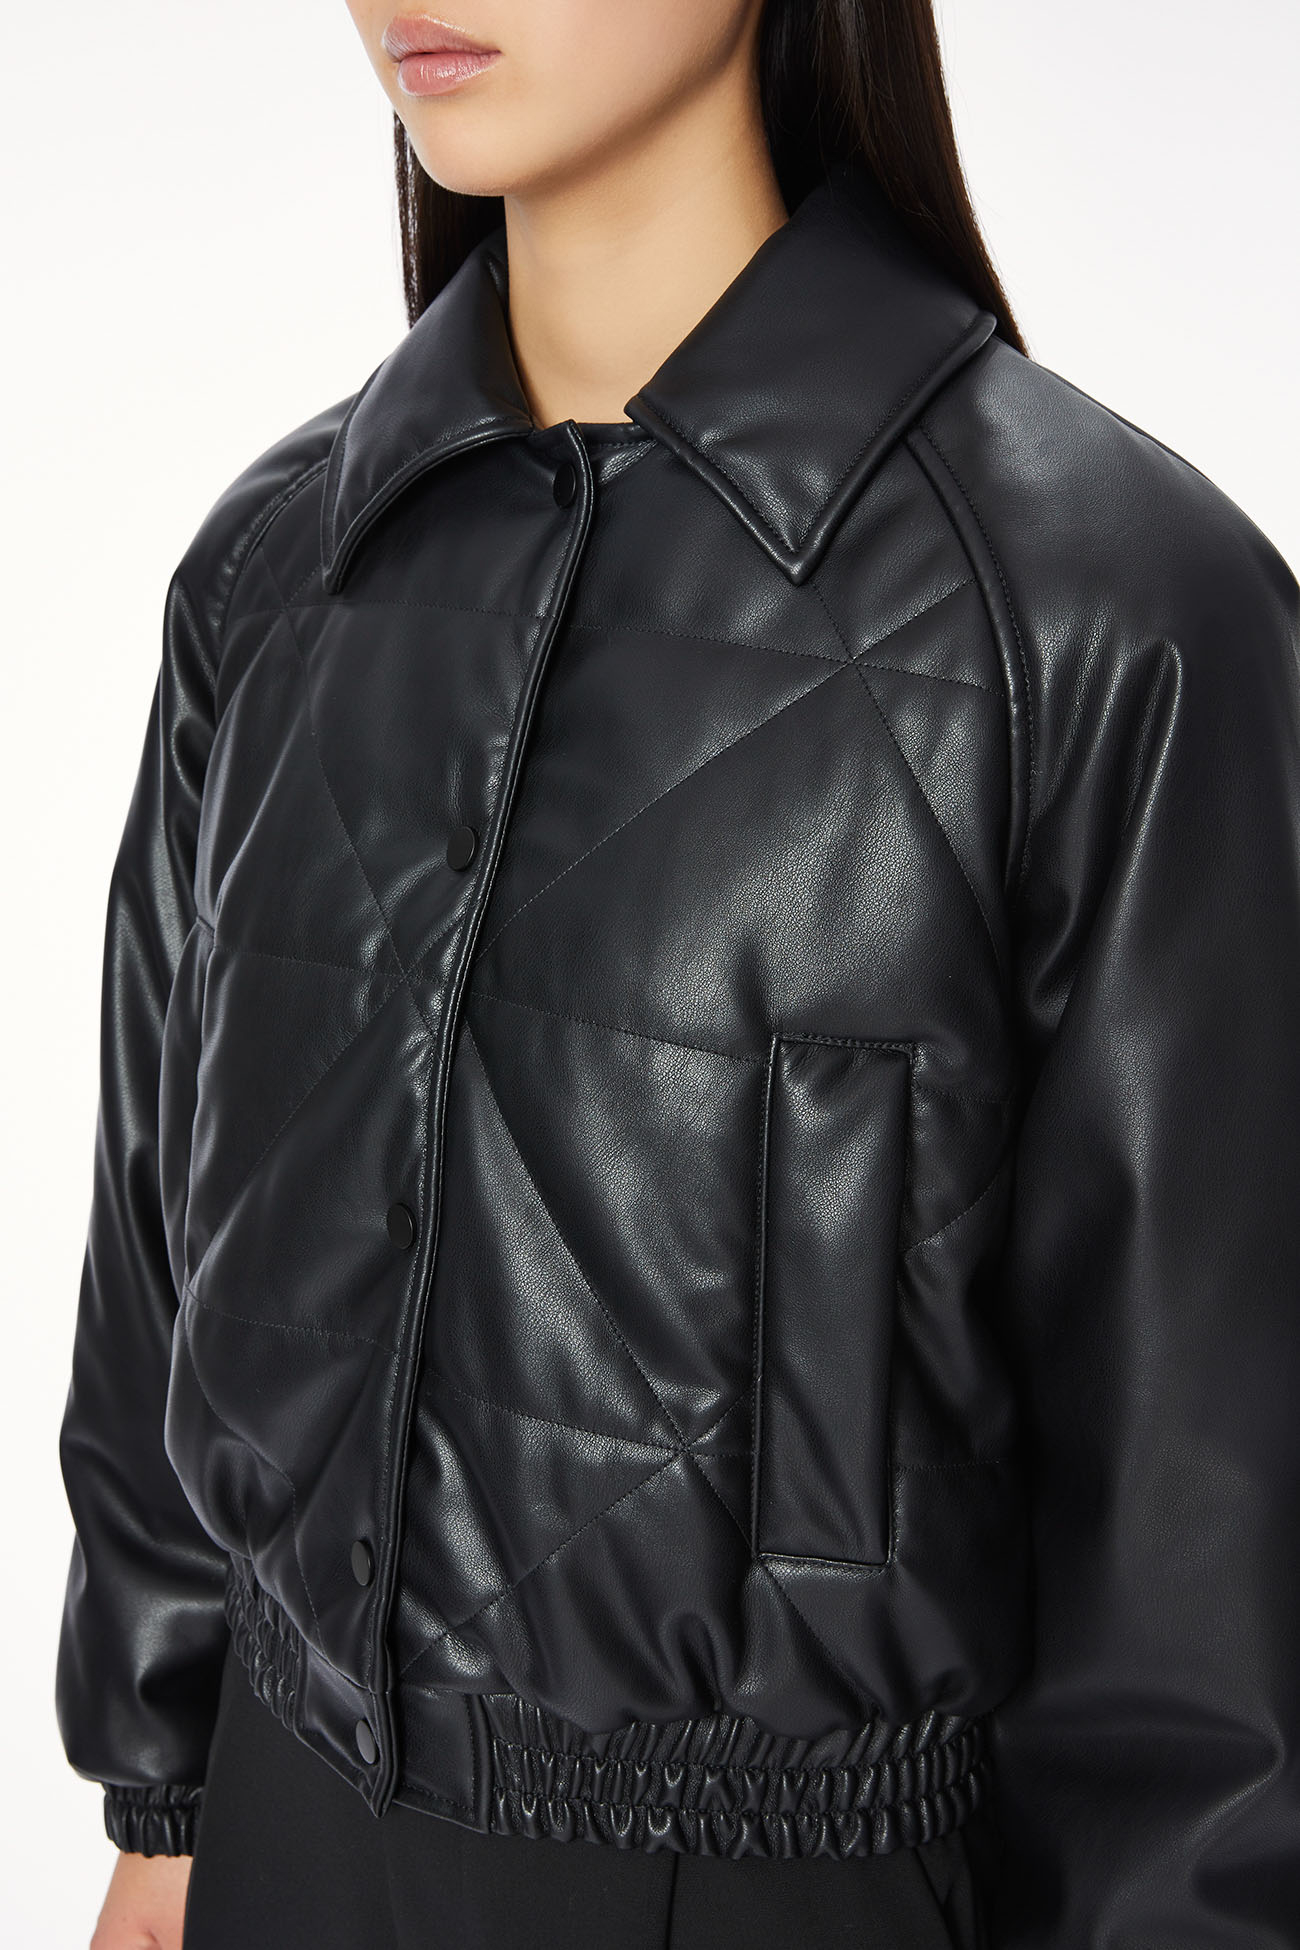 JACKET 9201 MADE IN ECO LEATHER - BLACK - OOF WEAR